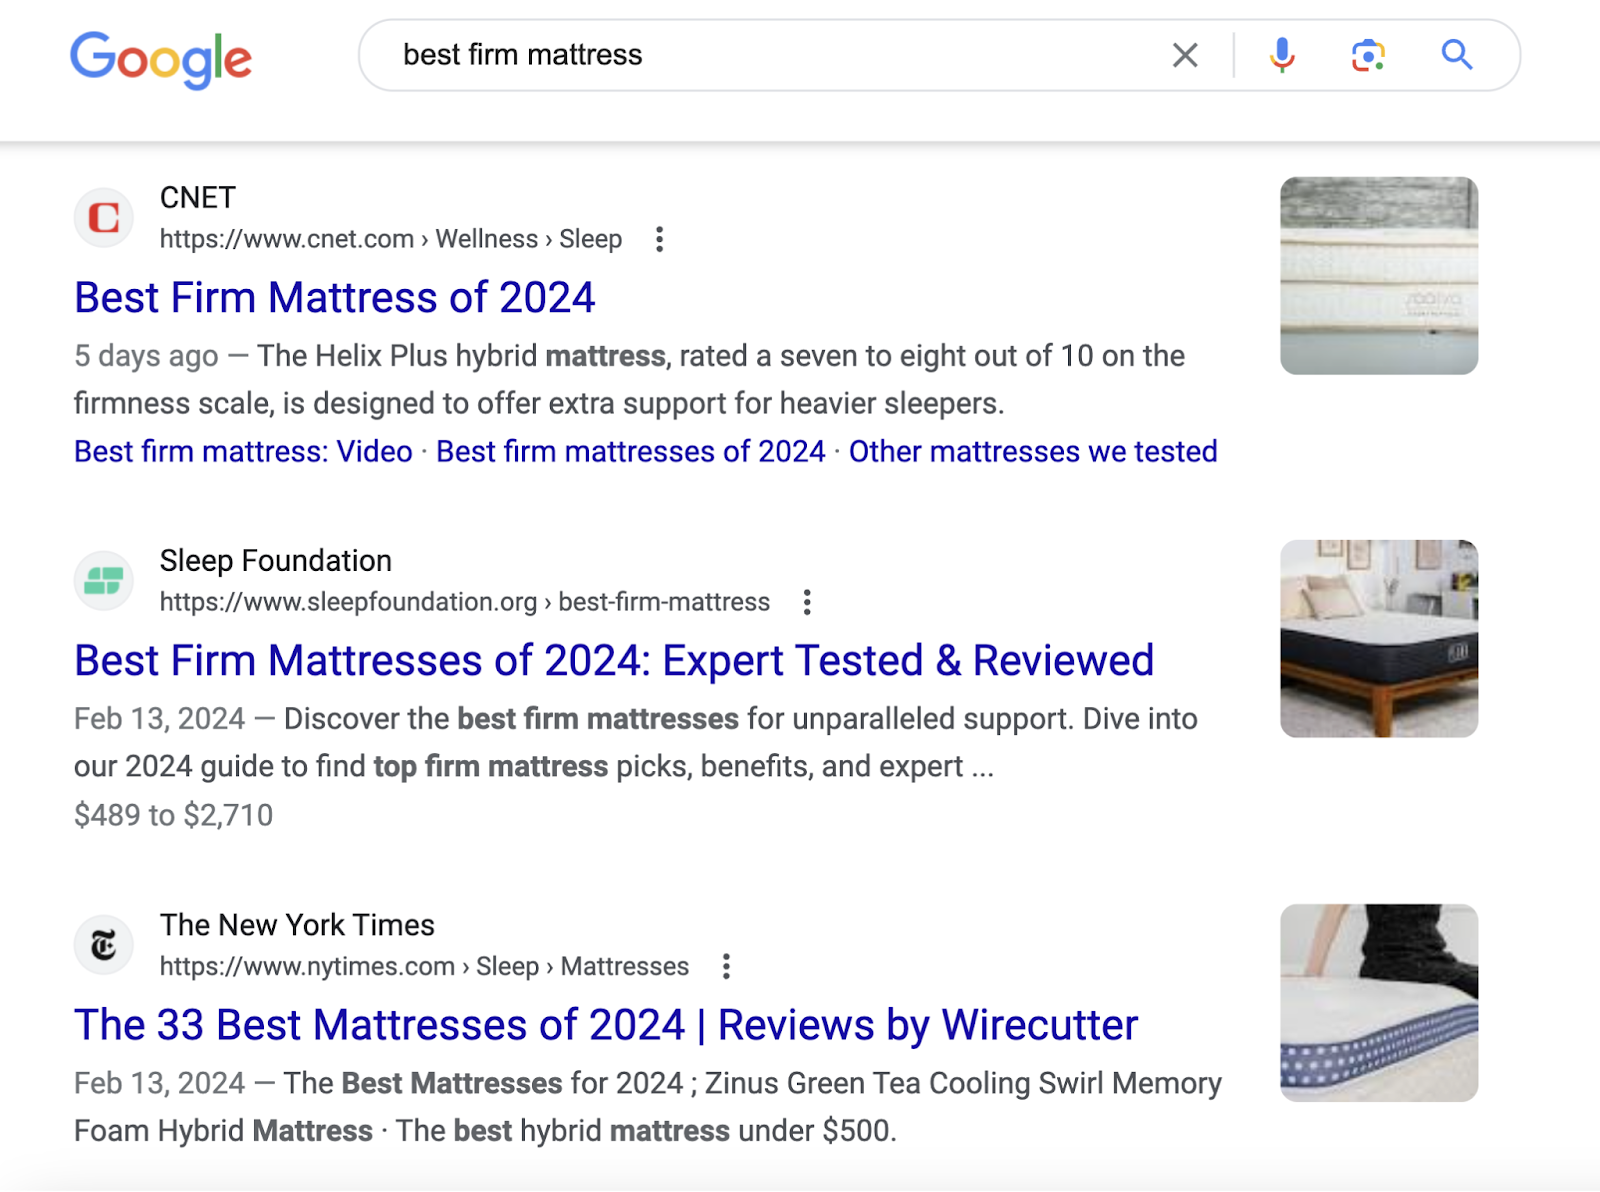 A section of Google's SERP for the “best firm mattress” query